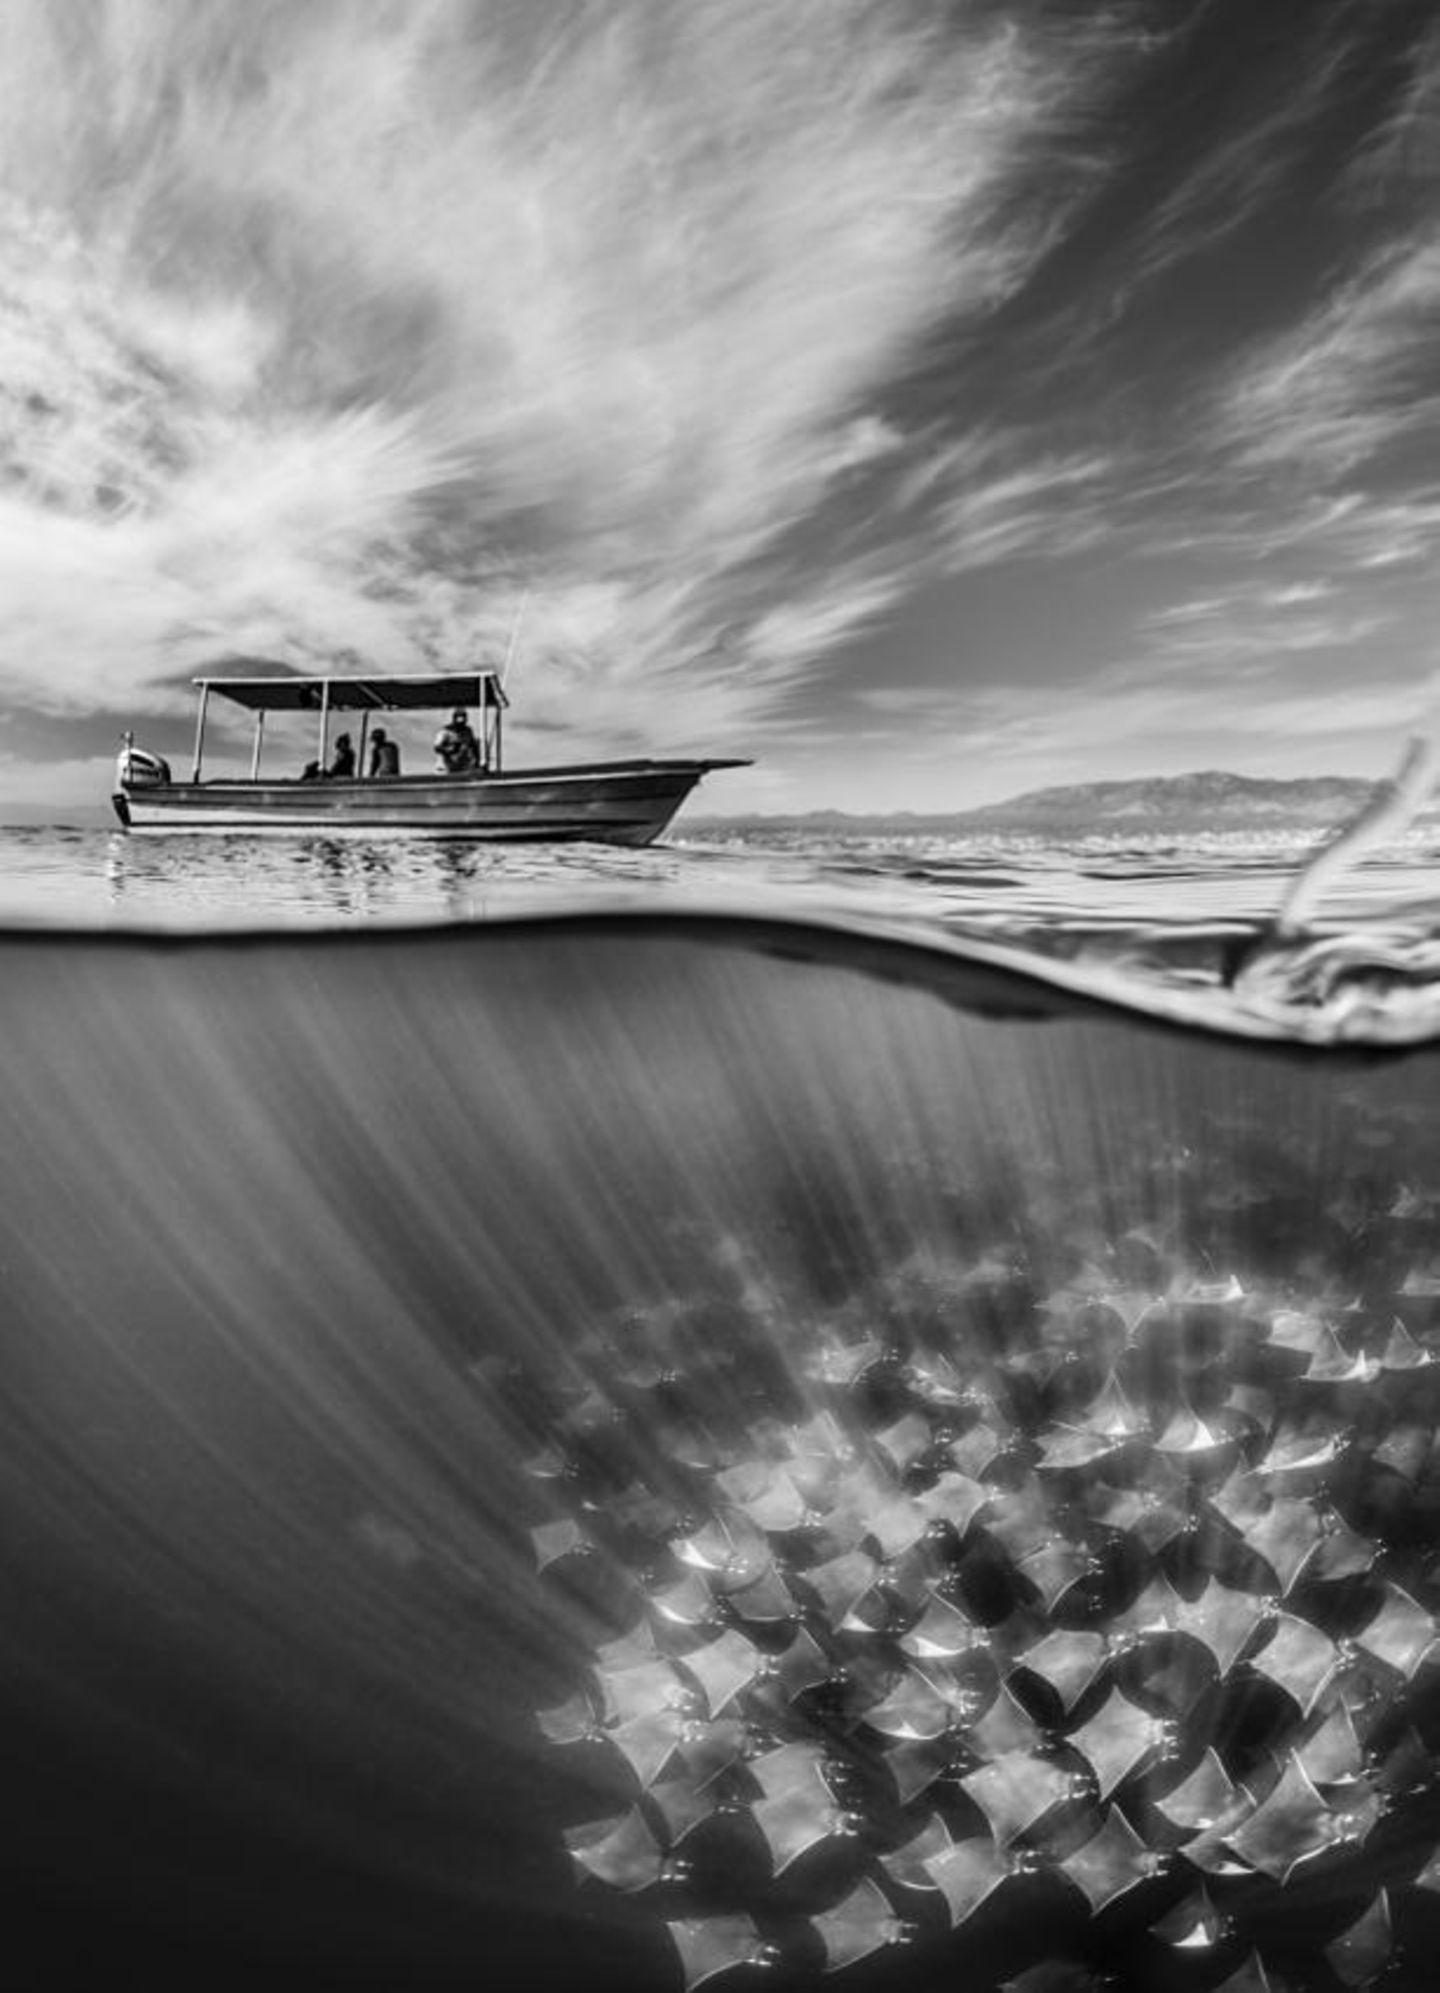 Photographer Name: Martin Broen  Image Name: Below the Surface  Year: 2023  Image Description: A split shot of the mobula ray fever cruising below the surface.  Series Name: Mobula Ray Fever  Series Description: A series of photographs taken below, above and within the water during the annual mobula ray migration in Baja California. The ray fever creates intriguing dynamic patterns and textures underwater, in contrast to the individual jumps outside the water.